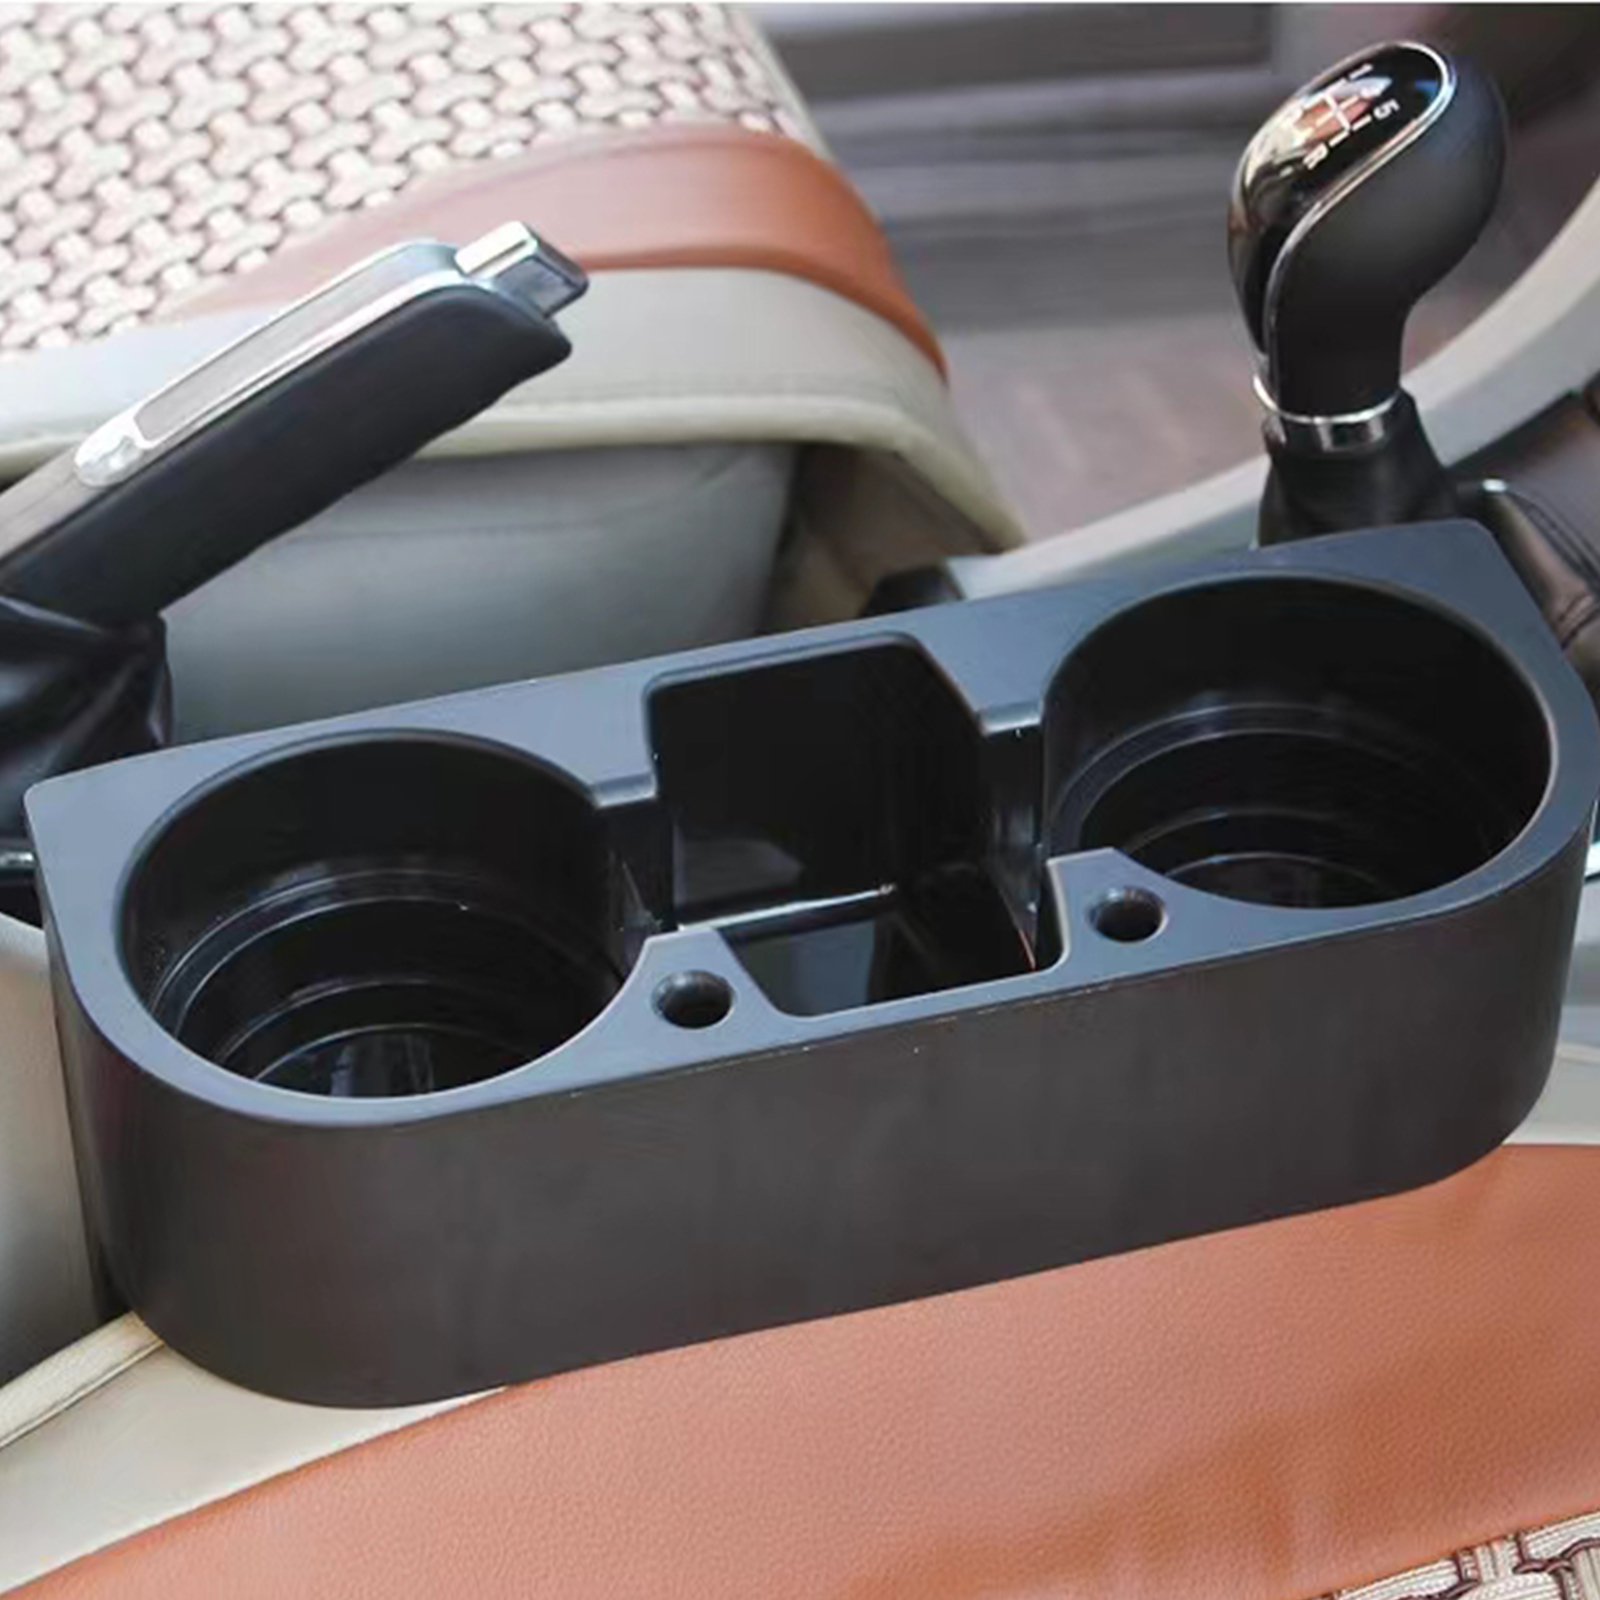 How to Add Cup Holders to Your Car